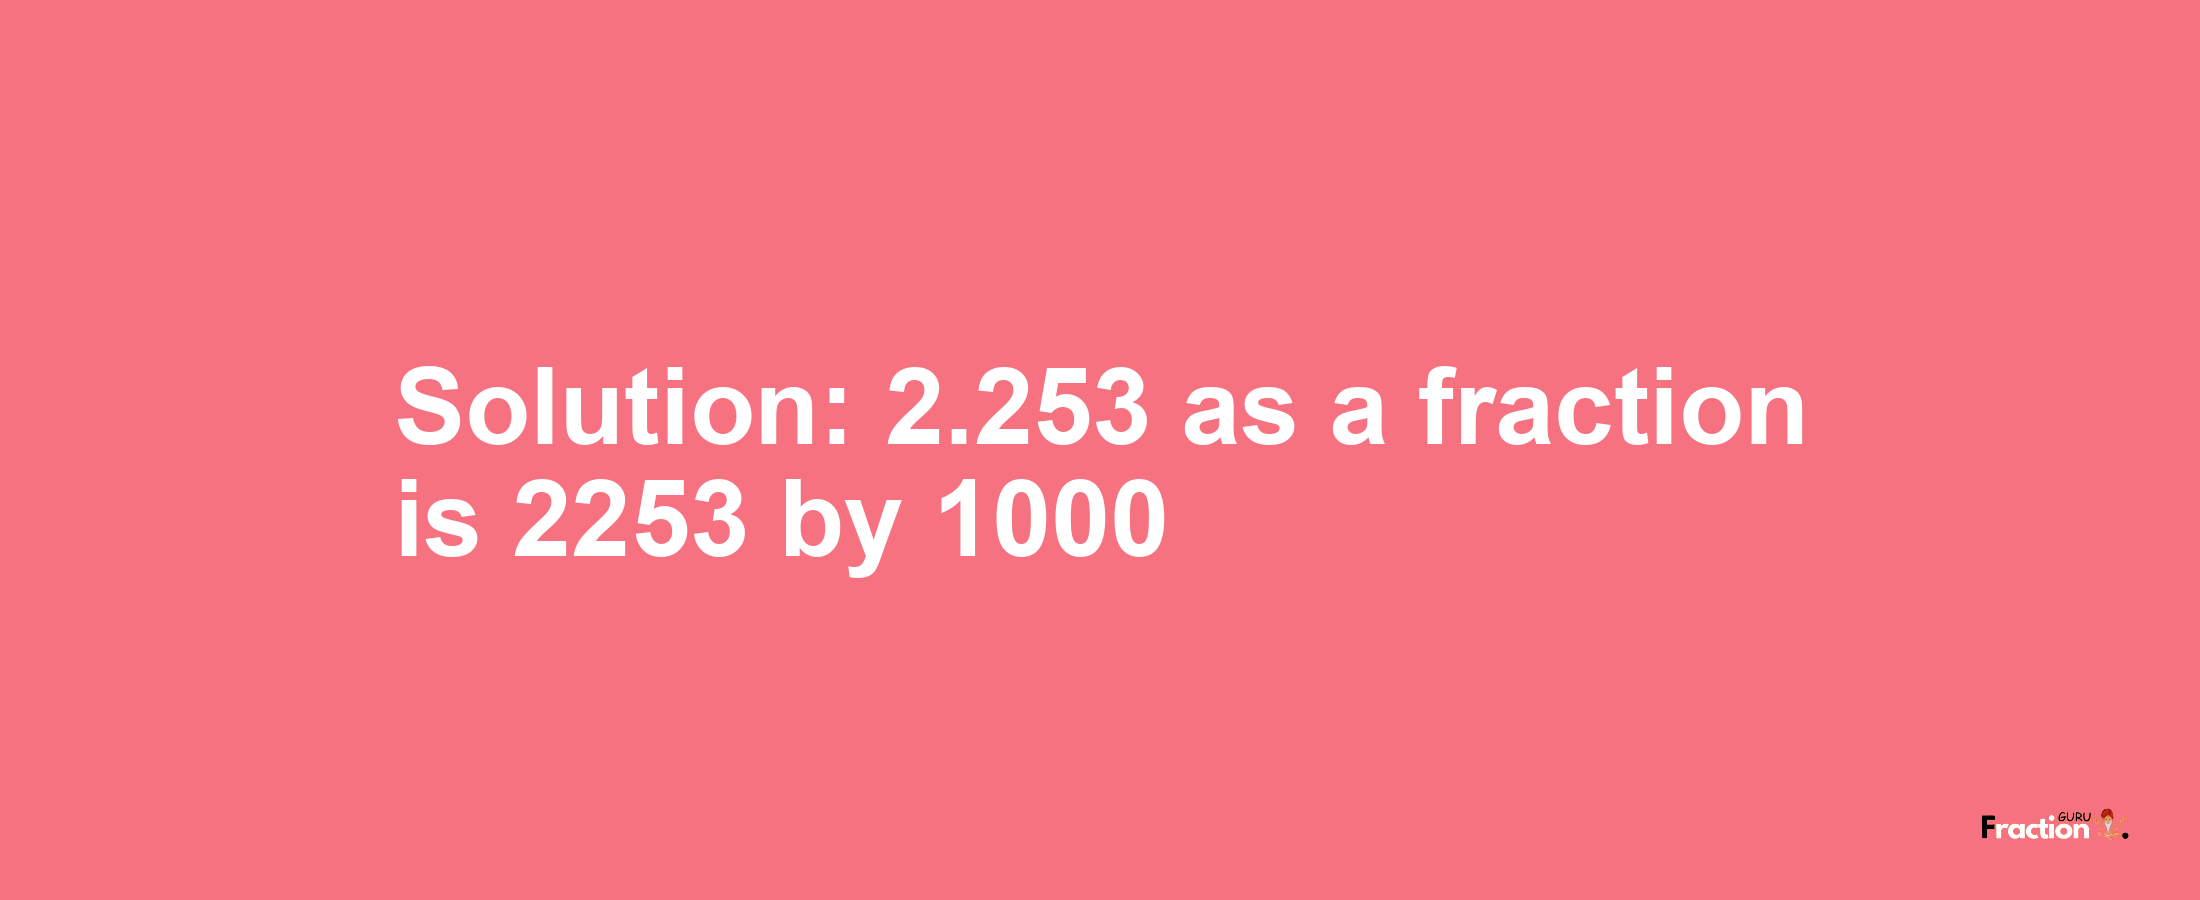 Solution:2.253 as a fraction is 2253/1000